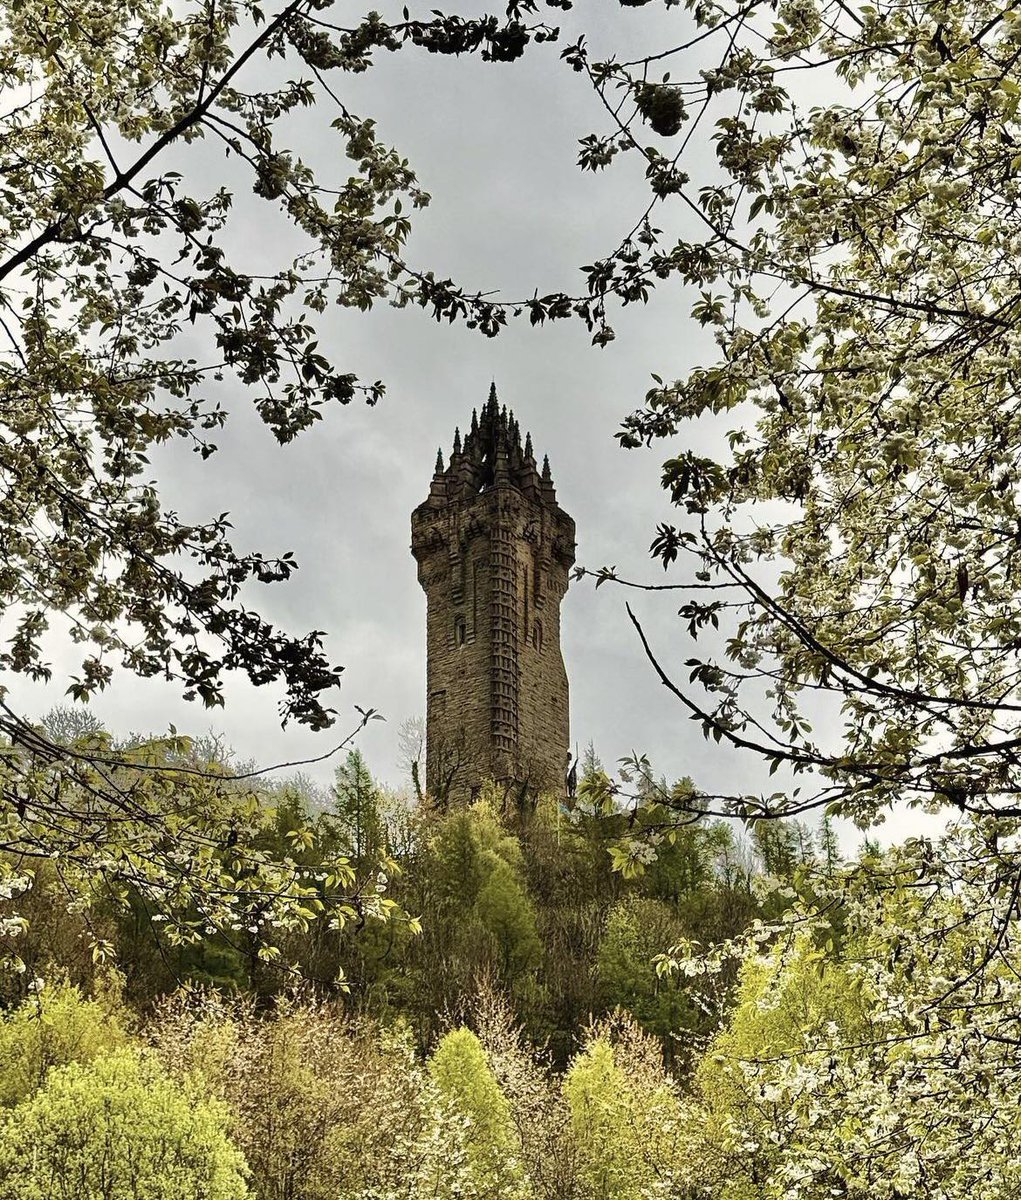 The beauty of spring in Stirling 🏴󠁧󠁢󠁳󠁣󠁴󠁿. You'll enjoy stunning views of the Monument from all around the city! 🍃 IG/maryram_d #VisitScotland